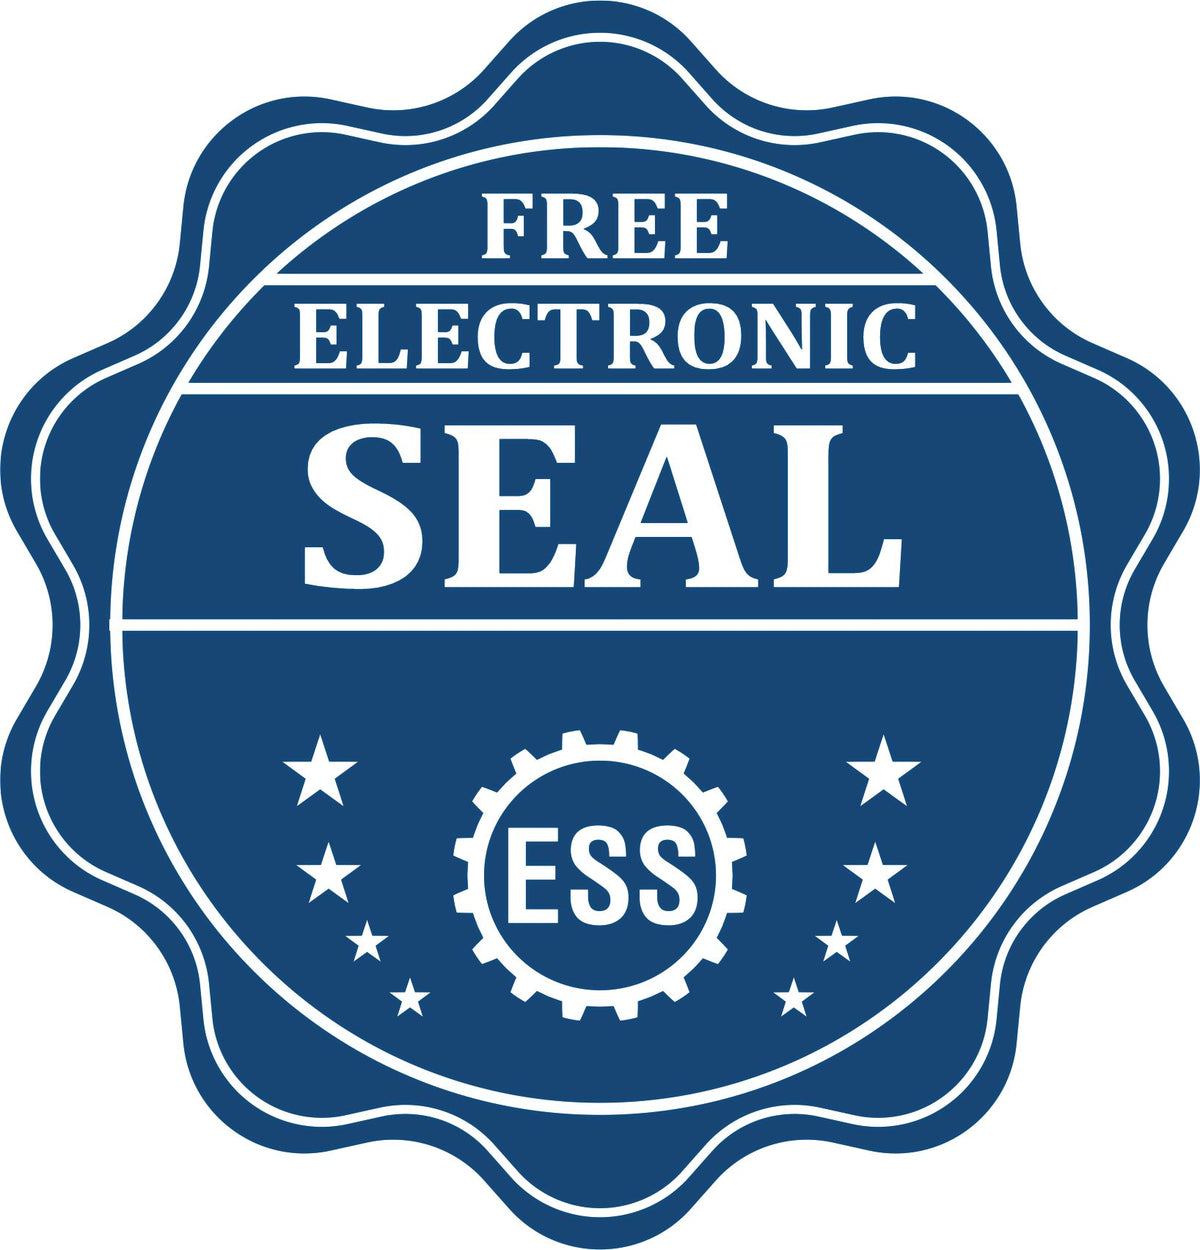 A badge showing a free electronic seal for the Slim Pre-Inked Tennessee Professional Engineer Seal Stamp with stars and the ESS gear on the emblem.